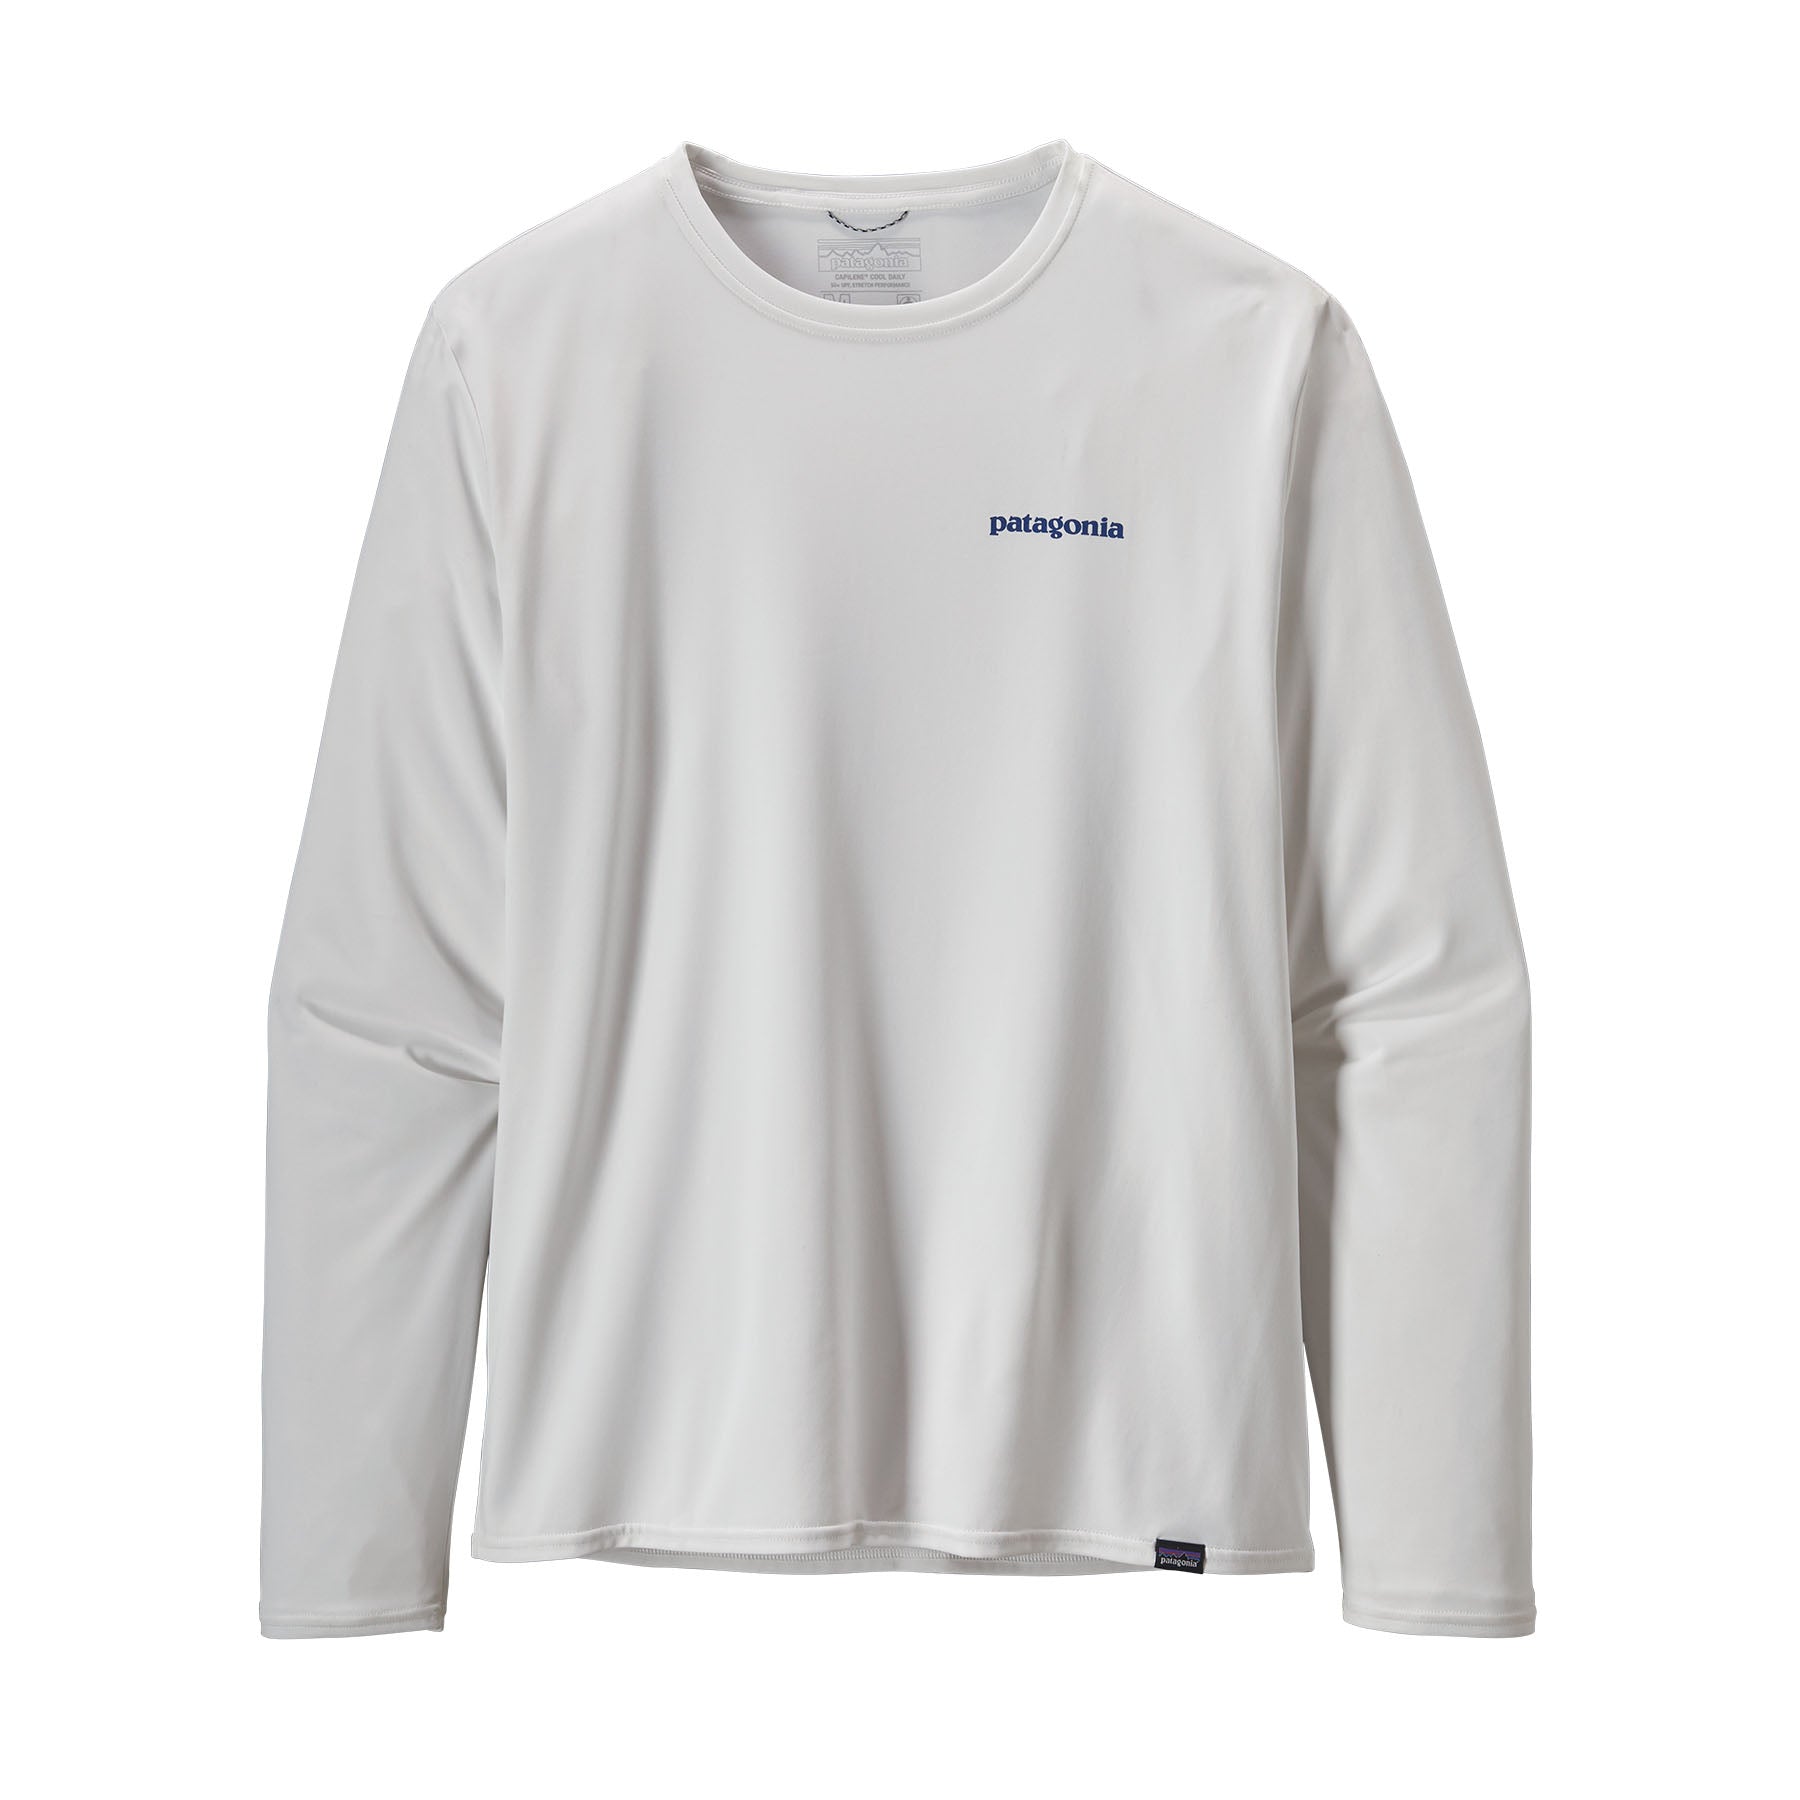 Patagonia 01. MENS APPAREL - MENS LS SHIRTS - MENS LS ACTIVE Men's Long Sleeve Capilene Cool Daily Graphic Shirt - Waters BOLW BOARDSHORT LOGO|WHITE